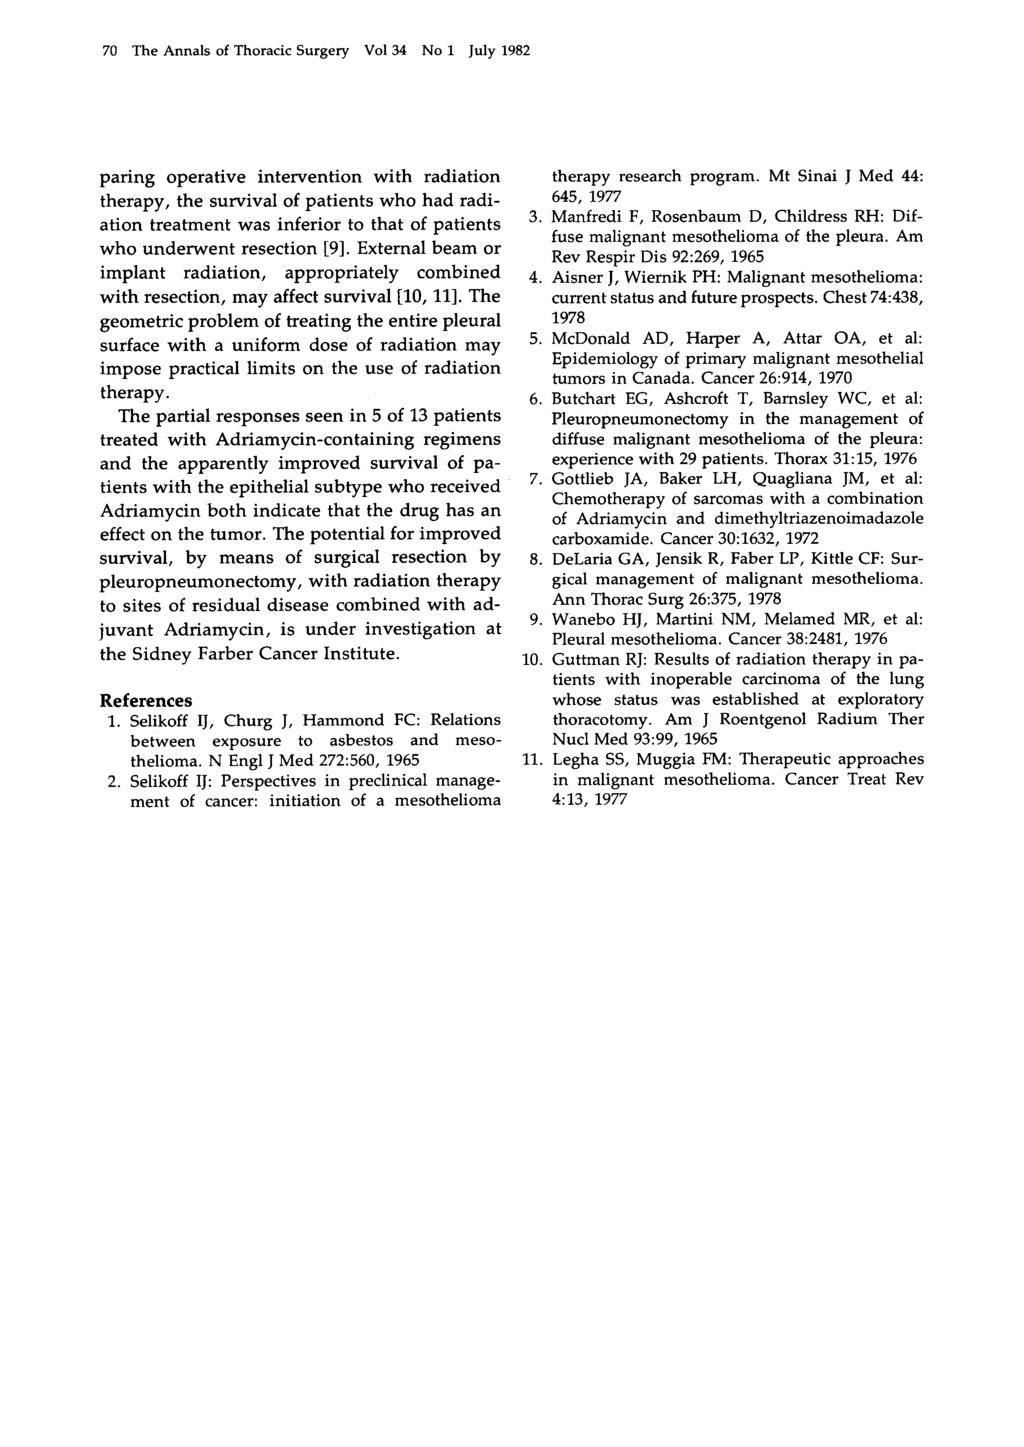 70 The Annals of Thoracic Surgery Vol34 No 1 July 1982 paring operative intervention with radiation therapy, the survival of patients who had radiation treatment was inferior to that of patients who